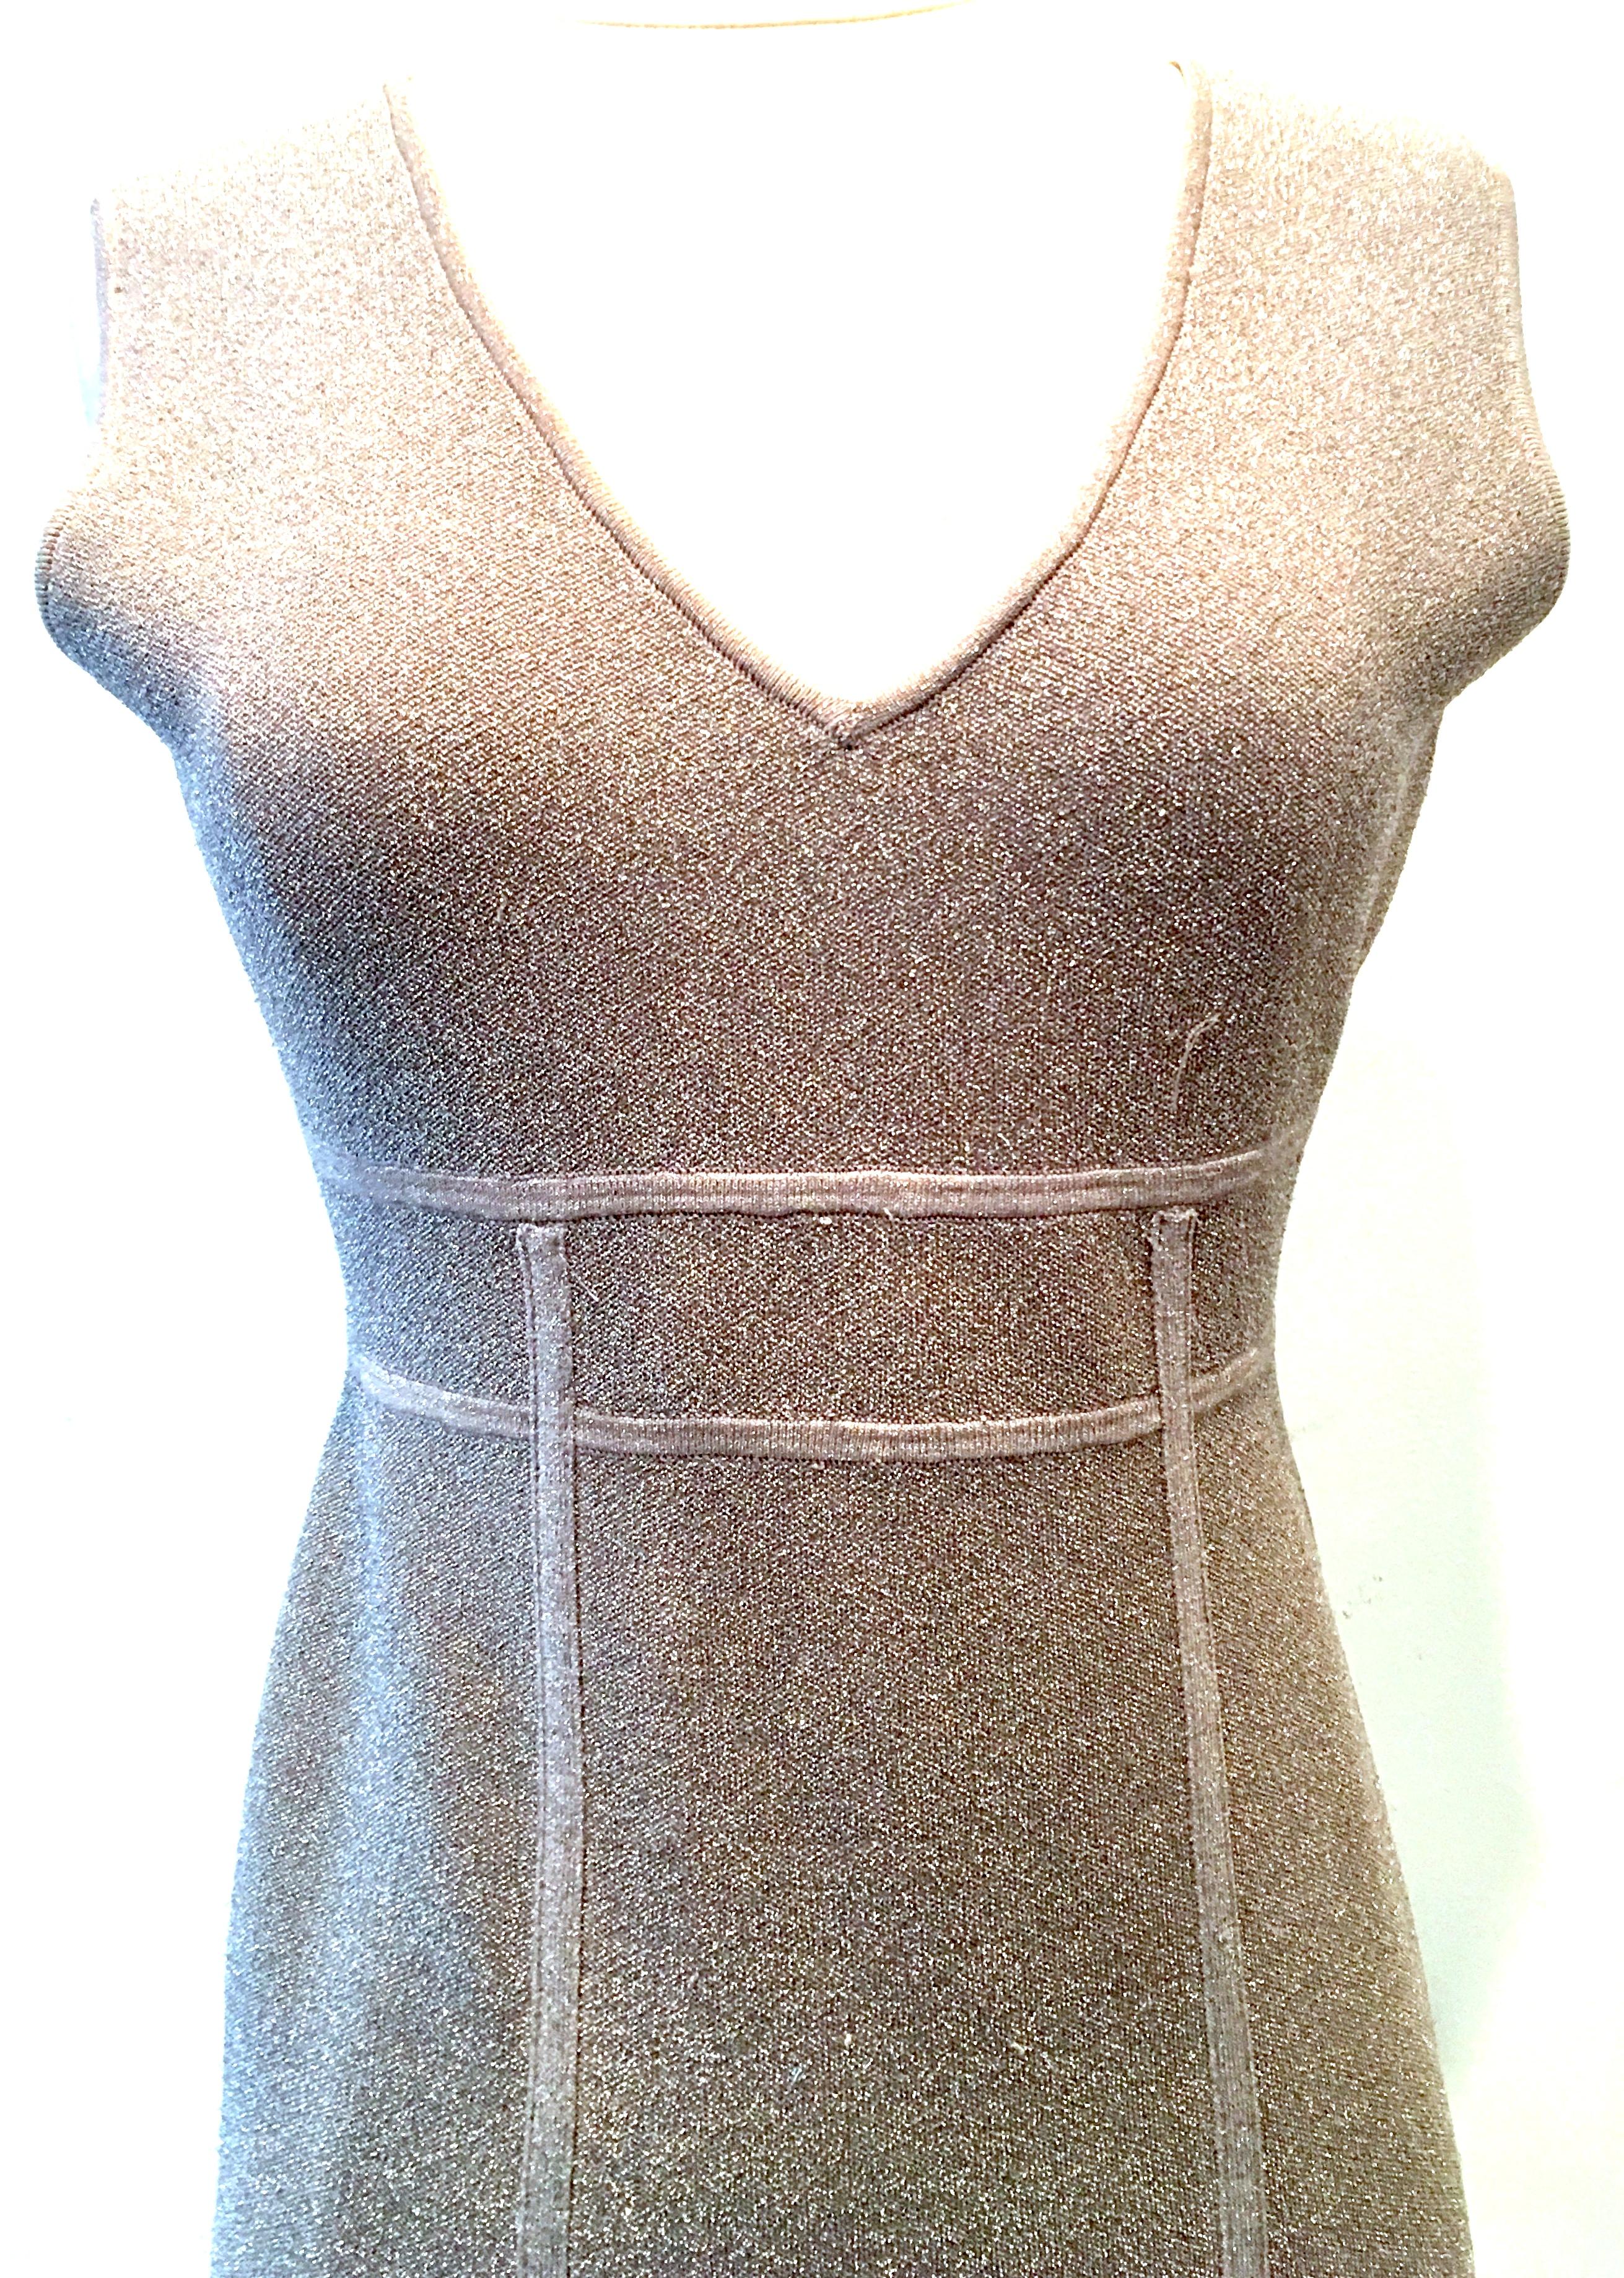 21st Century Herve Leger Style Metallic Cocktail Dress By Maxazria For BCBG  In Excellent Condition For Sale In West Palm Beach, FL